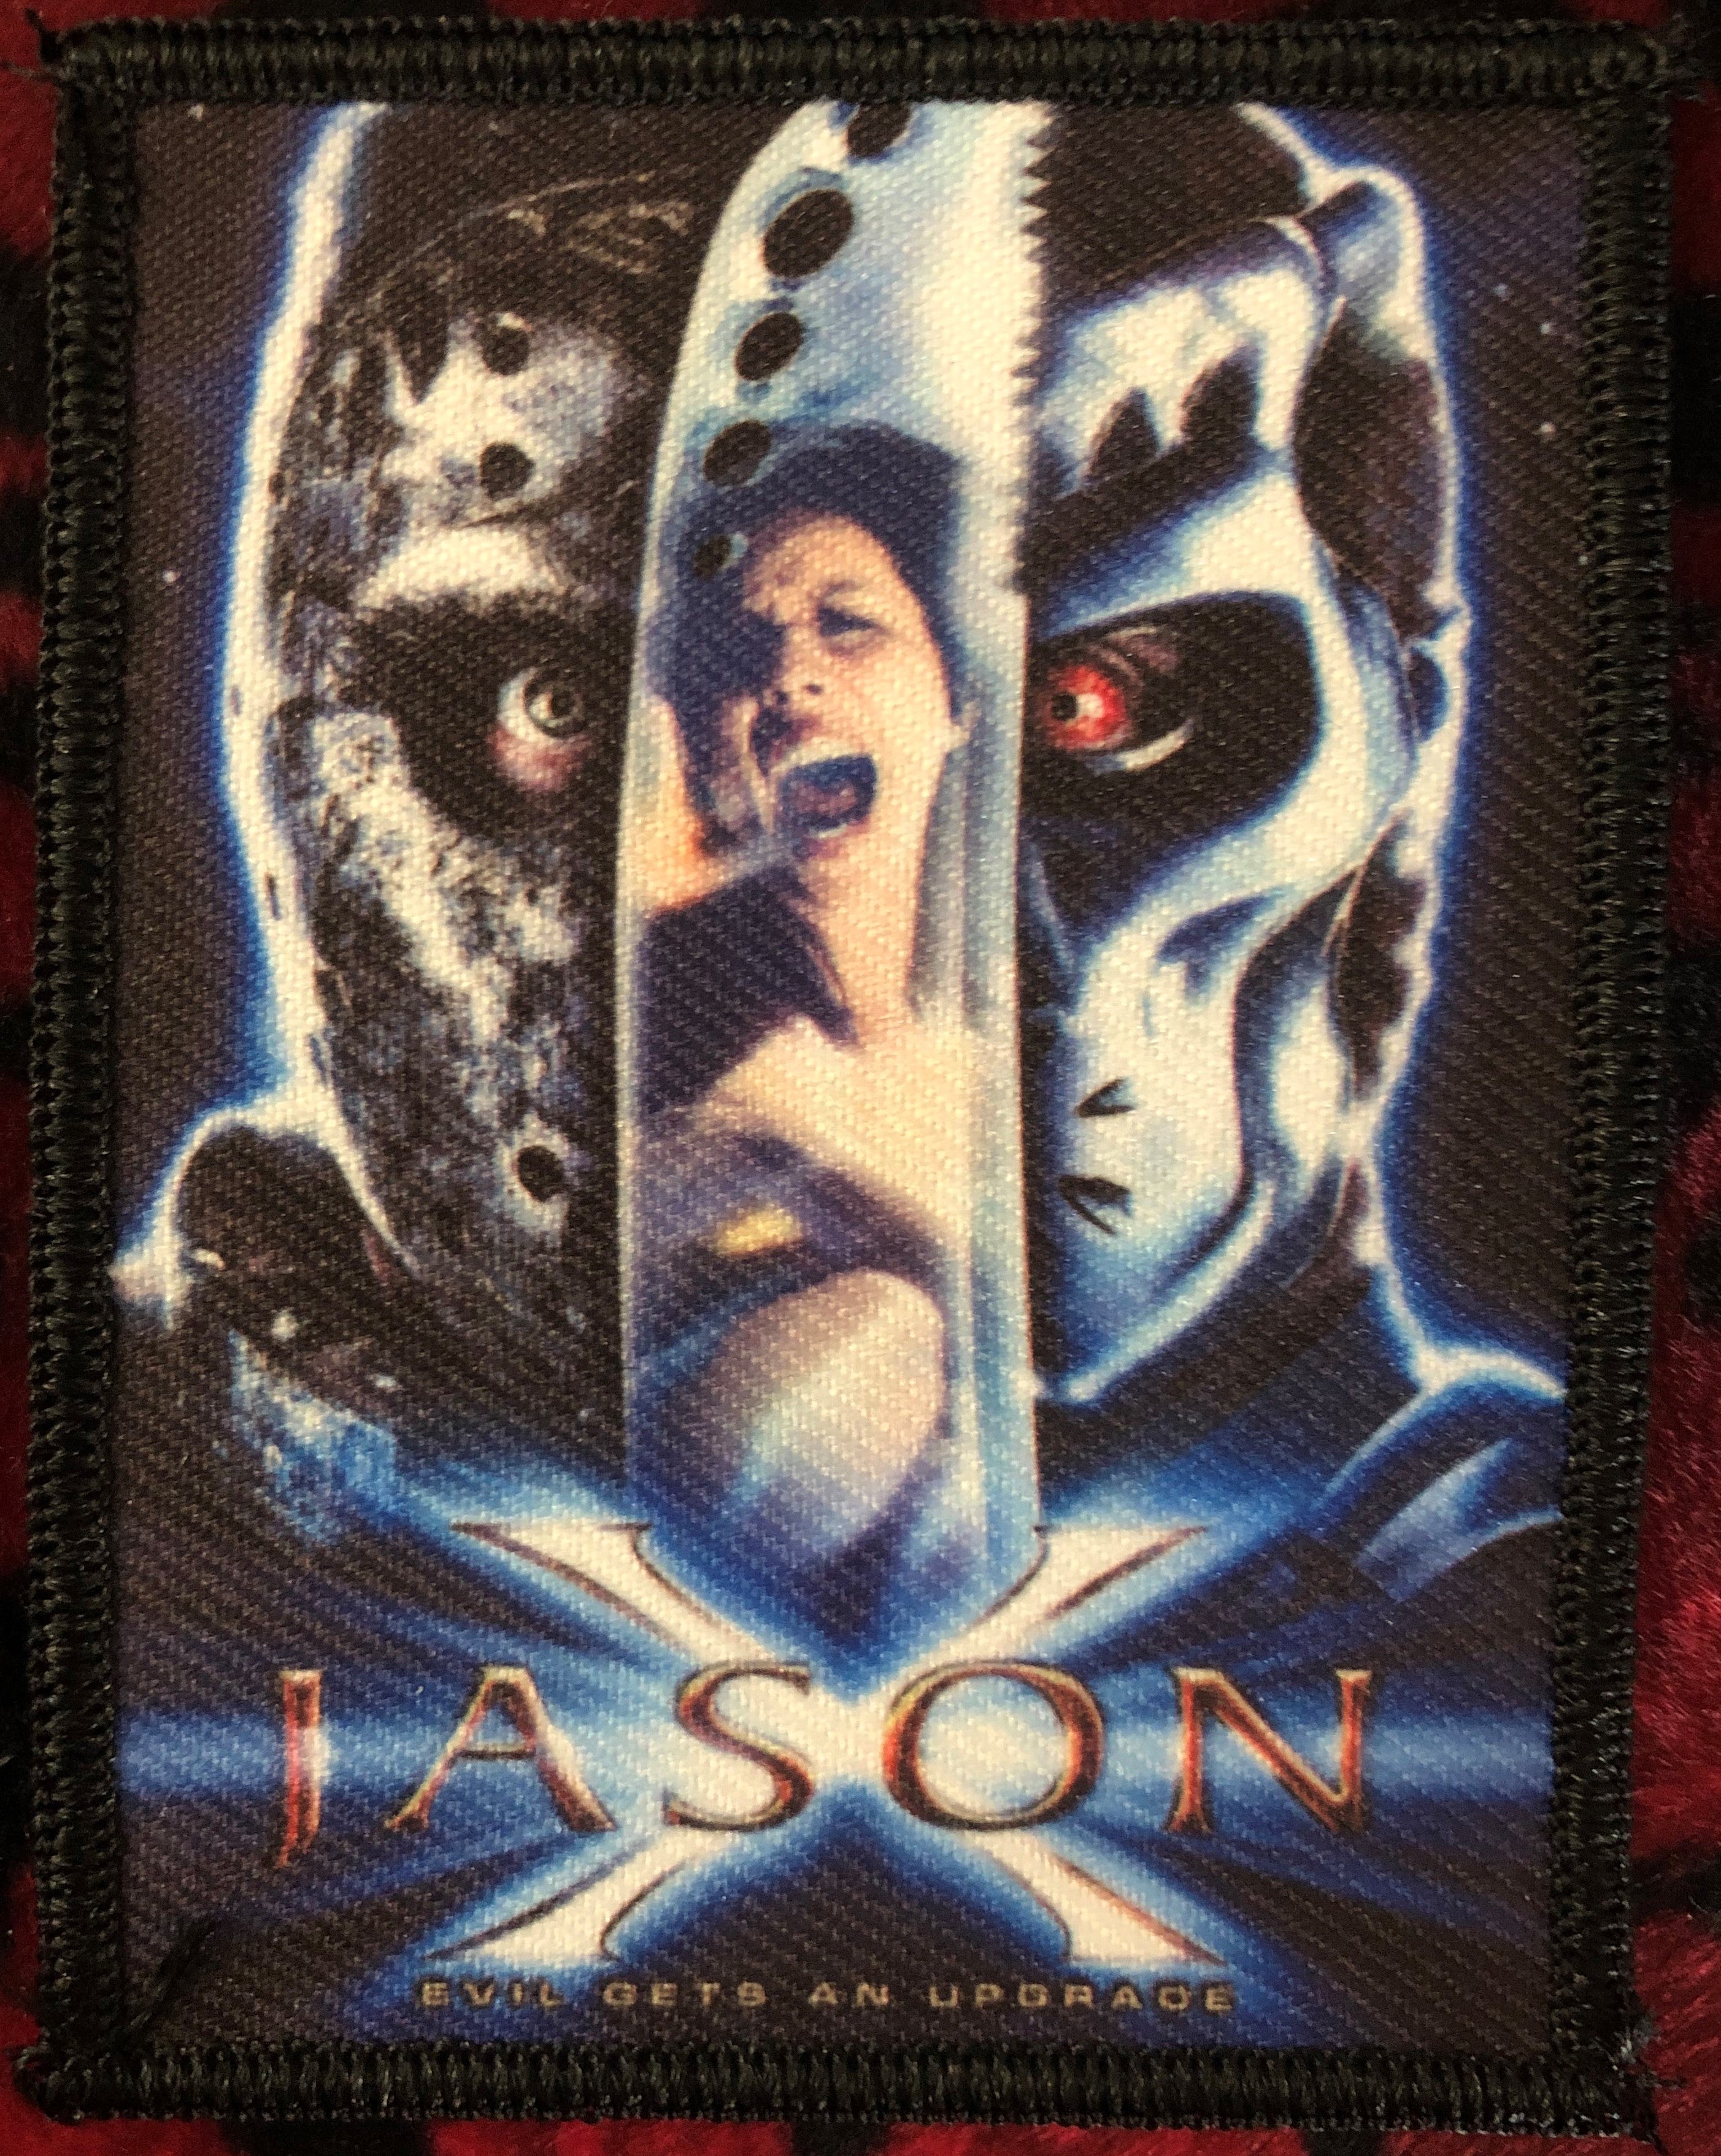 Friday the 13th - Jason X Patch